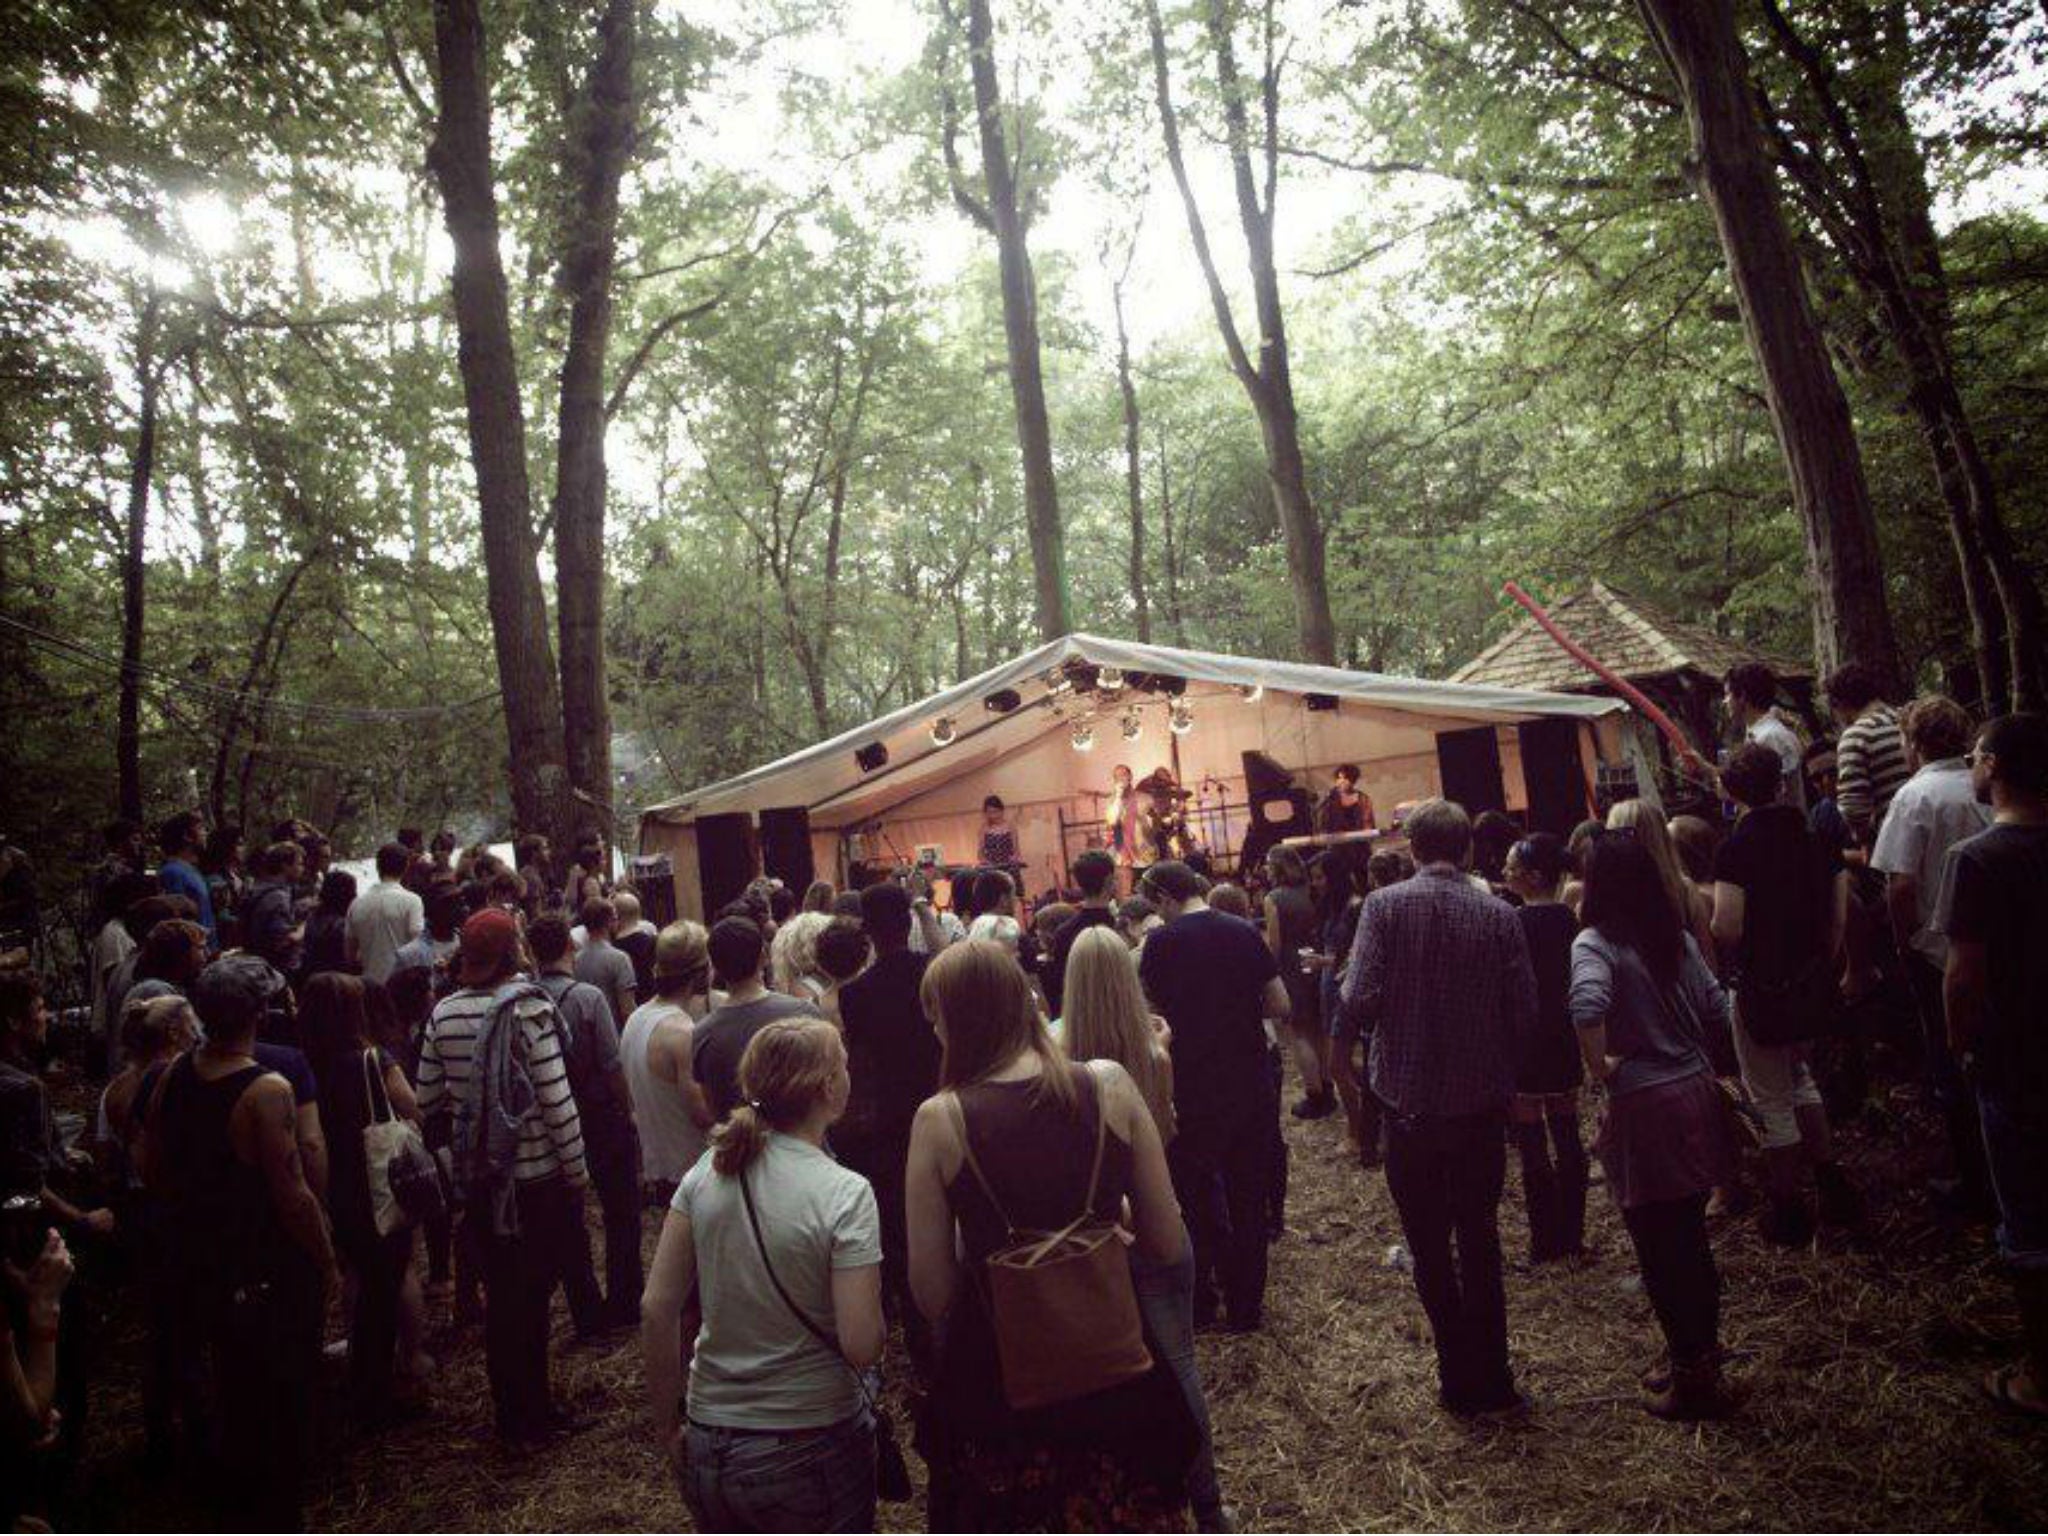 Festival-goers enjoy watching a band play at In the Woods boutique festival in Kent